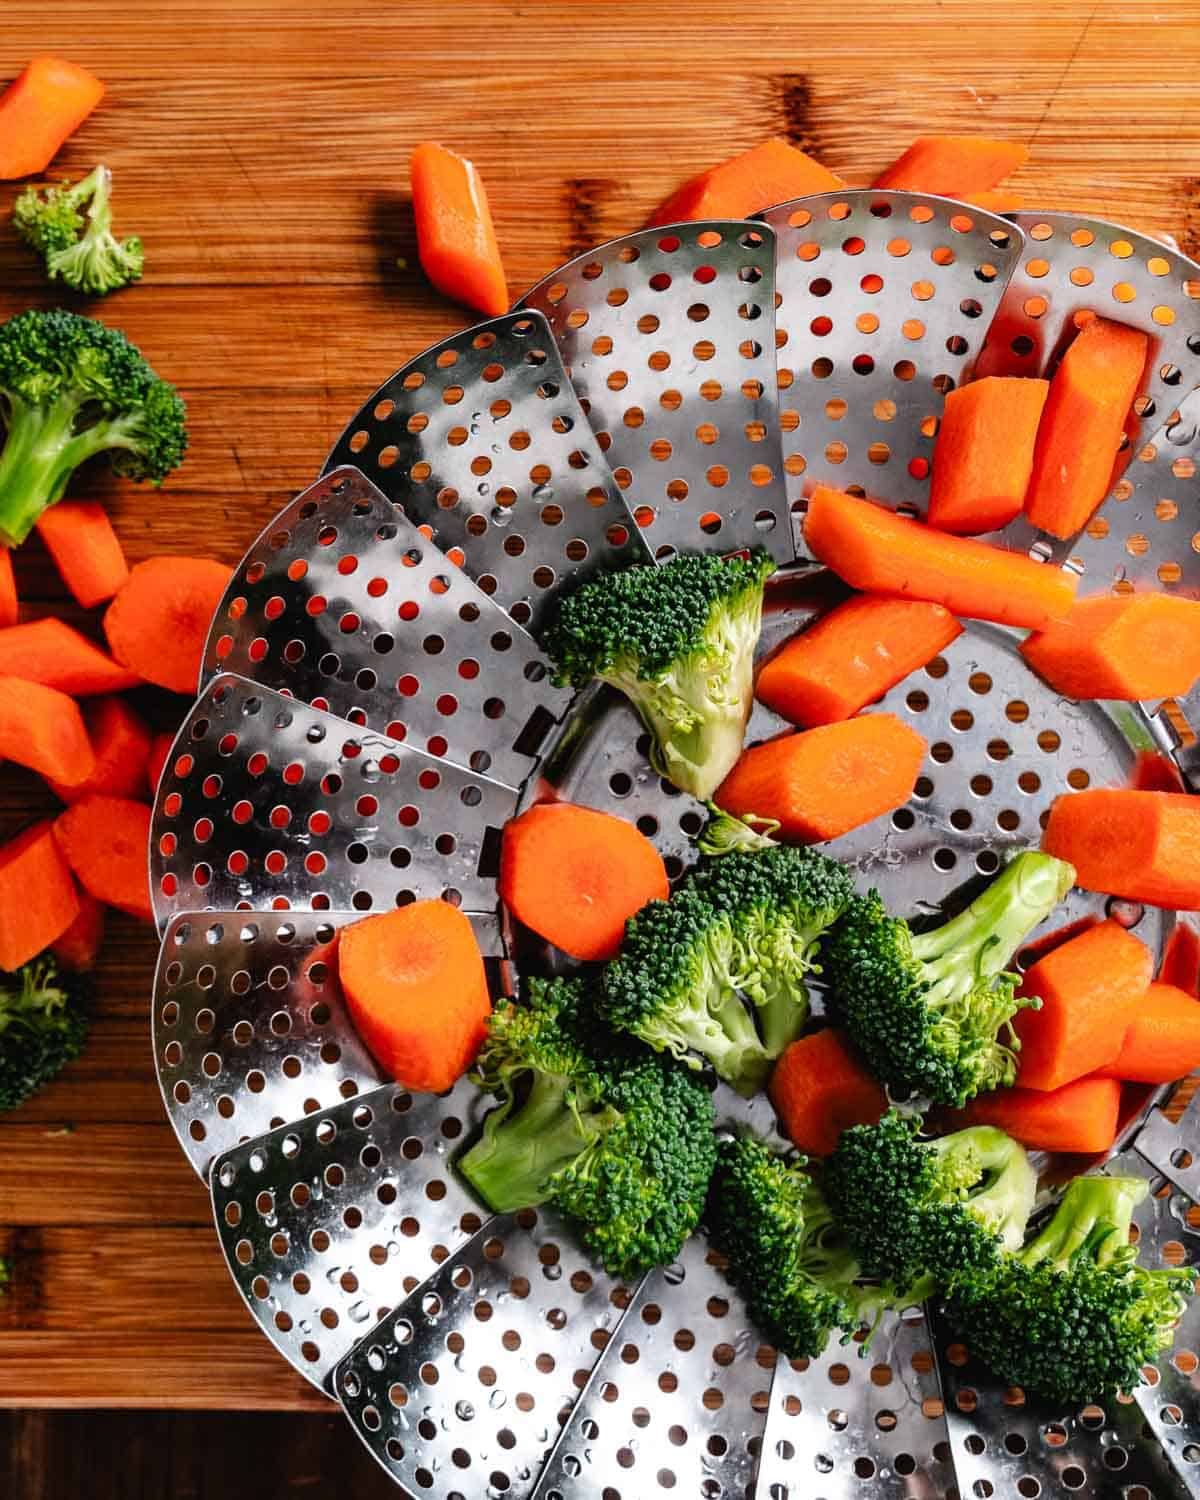 Steaming broccoli and carrots in a steamer basket.